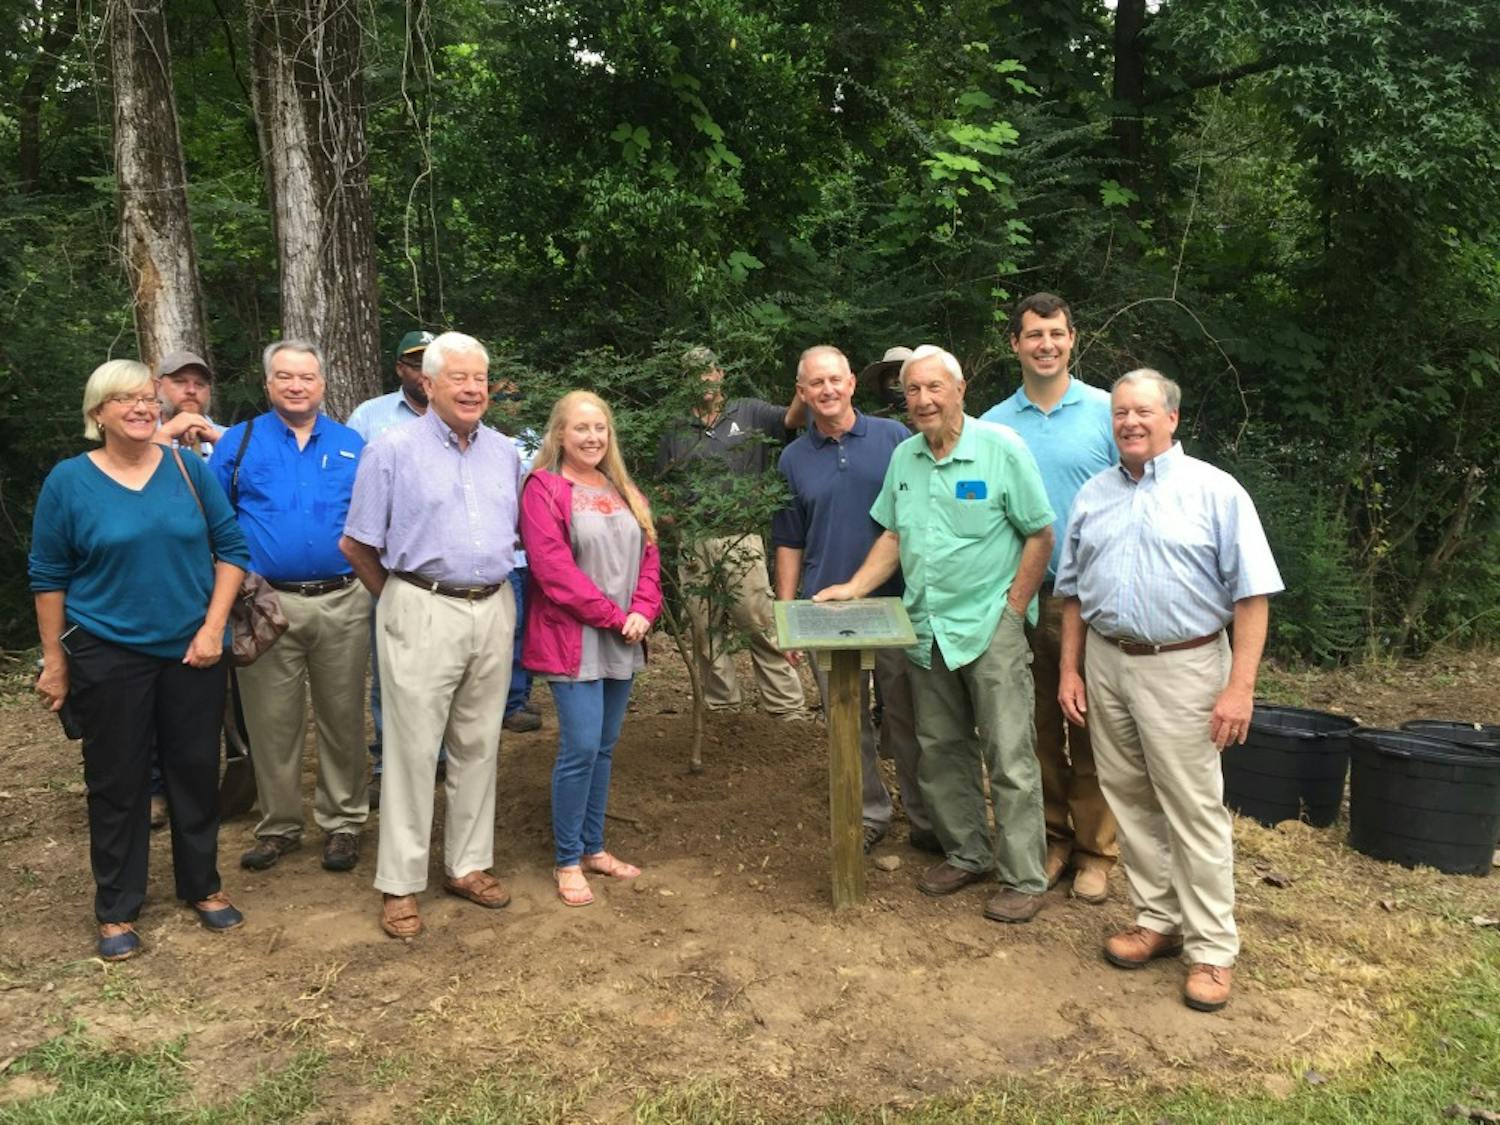 Former Auburn Head Coach Pat Dye in front of his donated Japanese maple to the George Bengston Historic Tree Trail with members of the Auburn Tree Commission and City employees on Aug. 8, 2017 in Auburn, Ala.